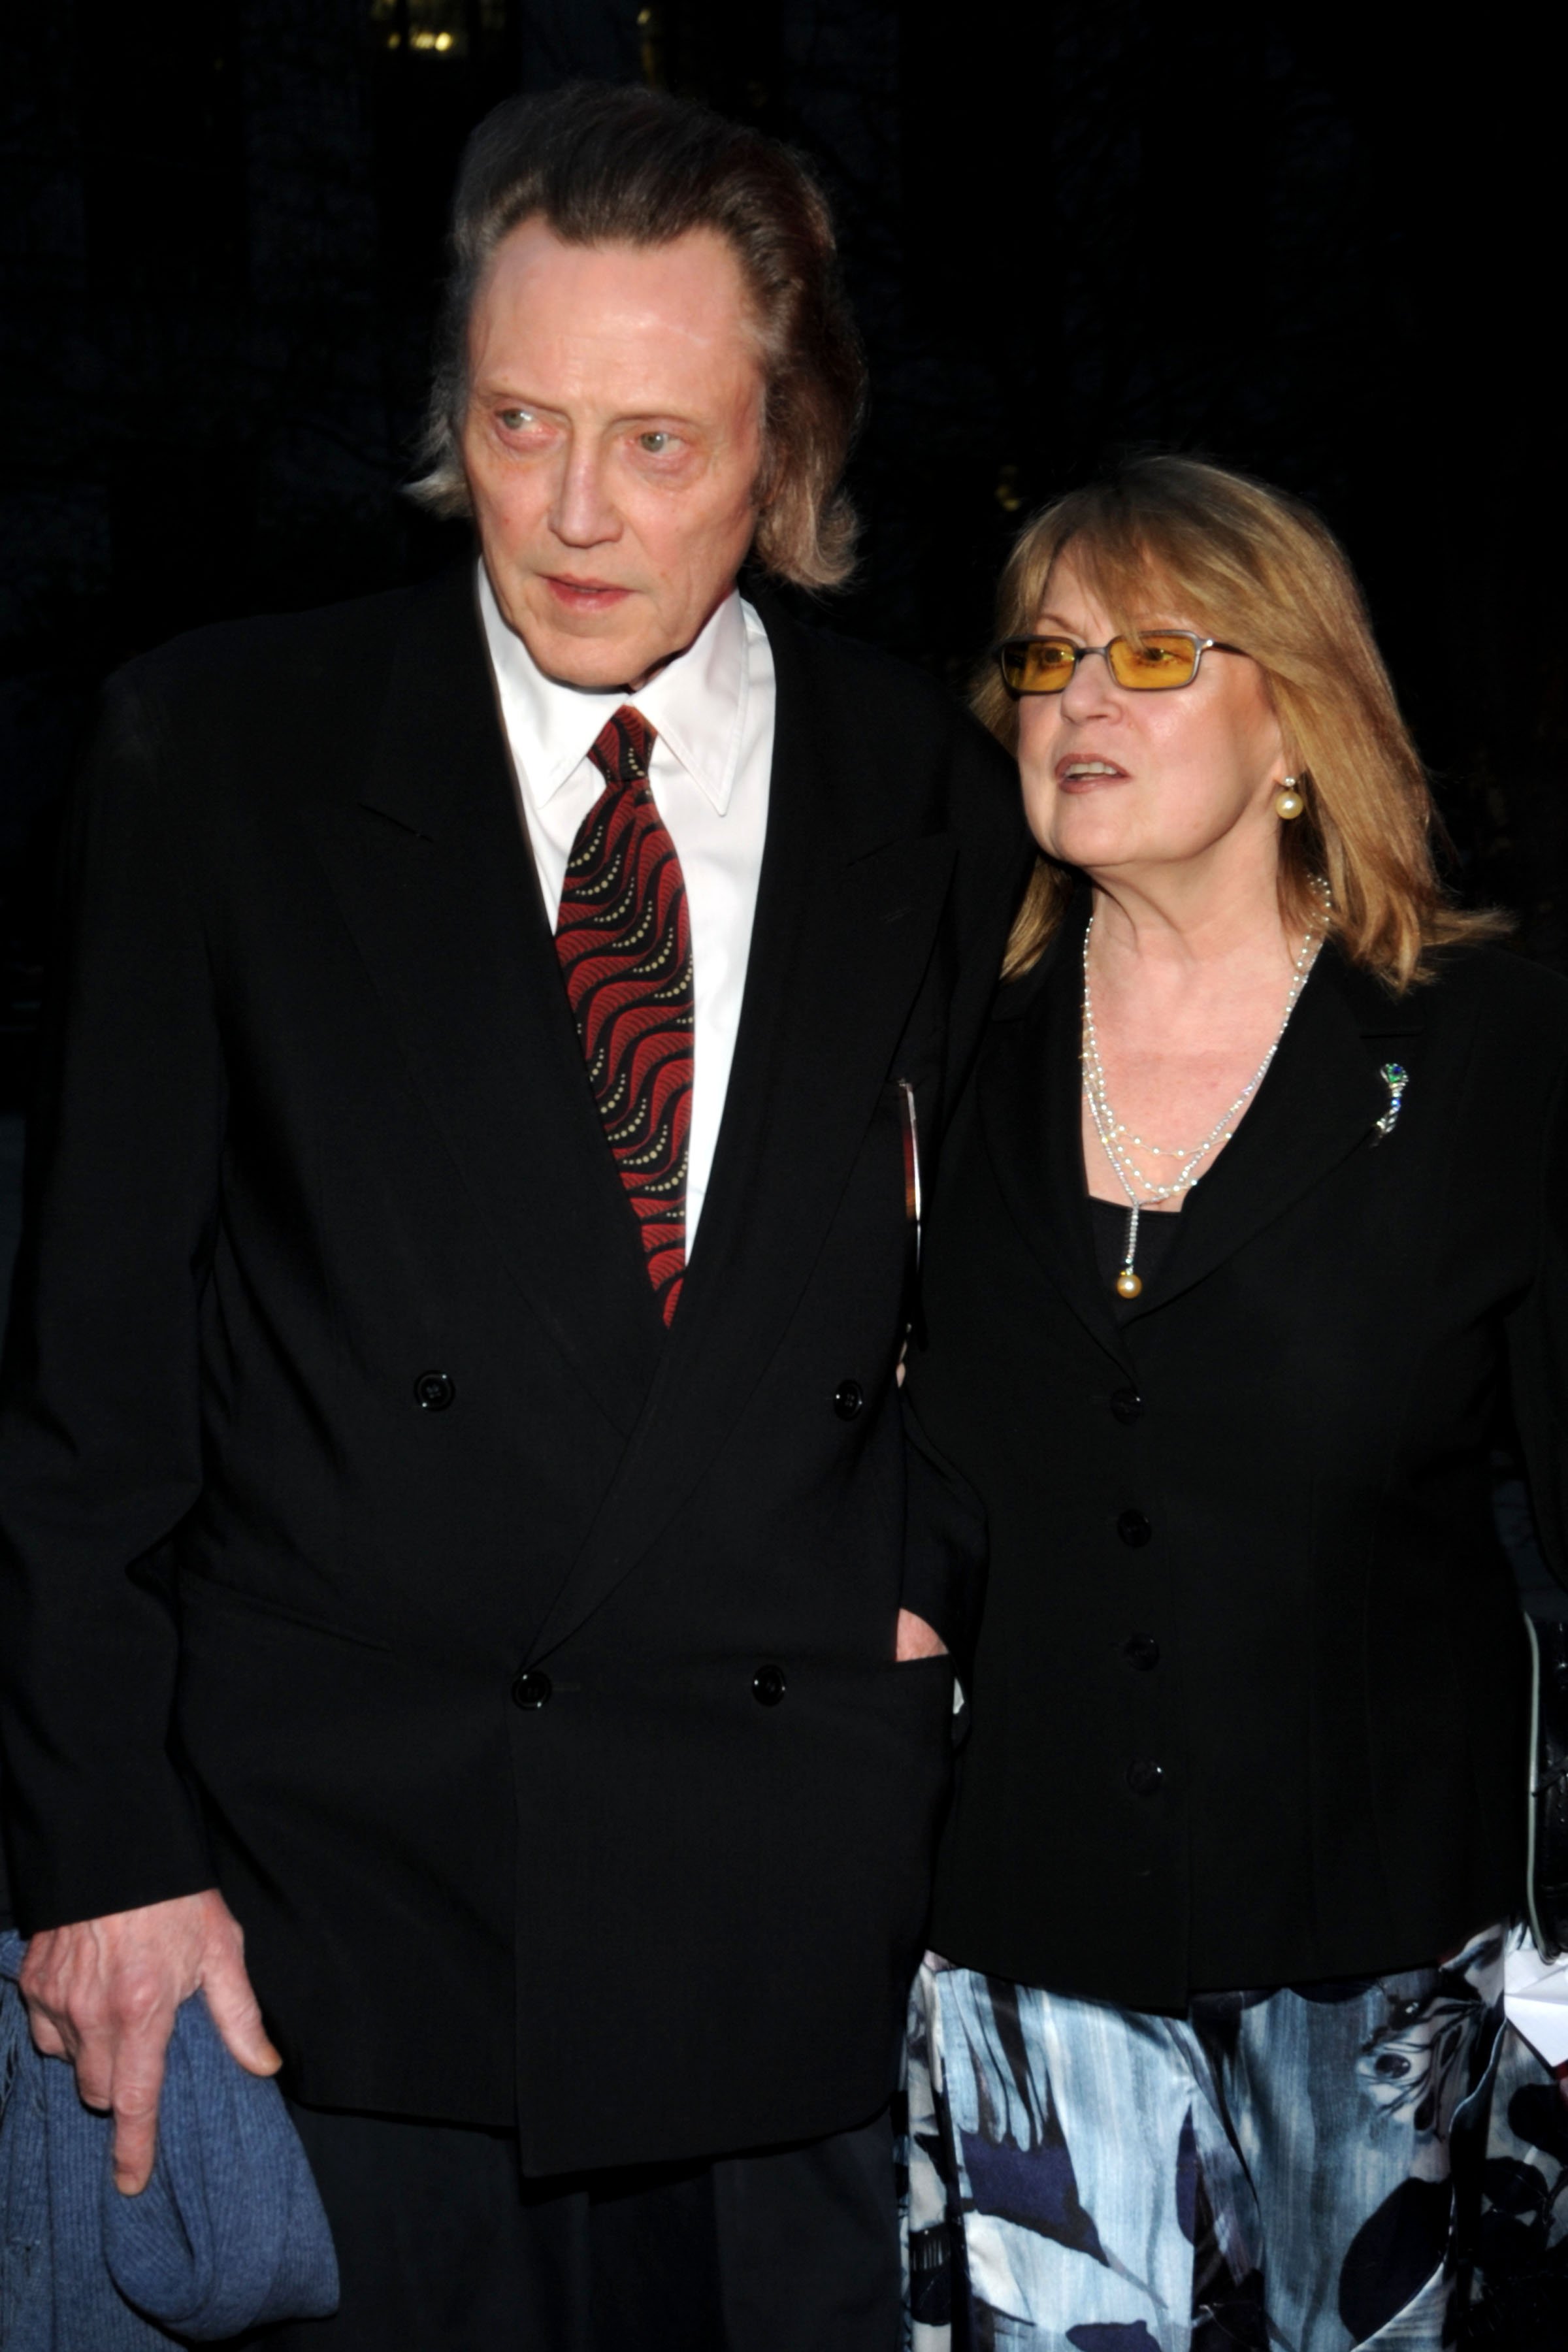 Christopher and Georgianne Walken at the Vanity Fair Tribeca Film Festival opening night dinner on April 21, 2009 | Source: Getty Images